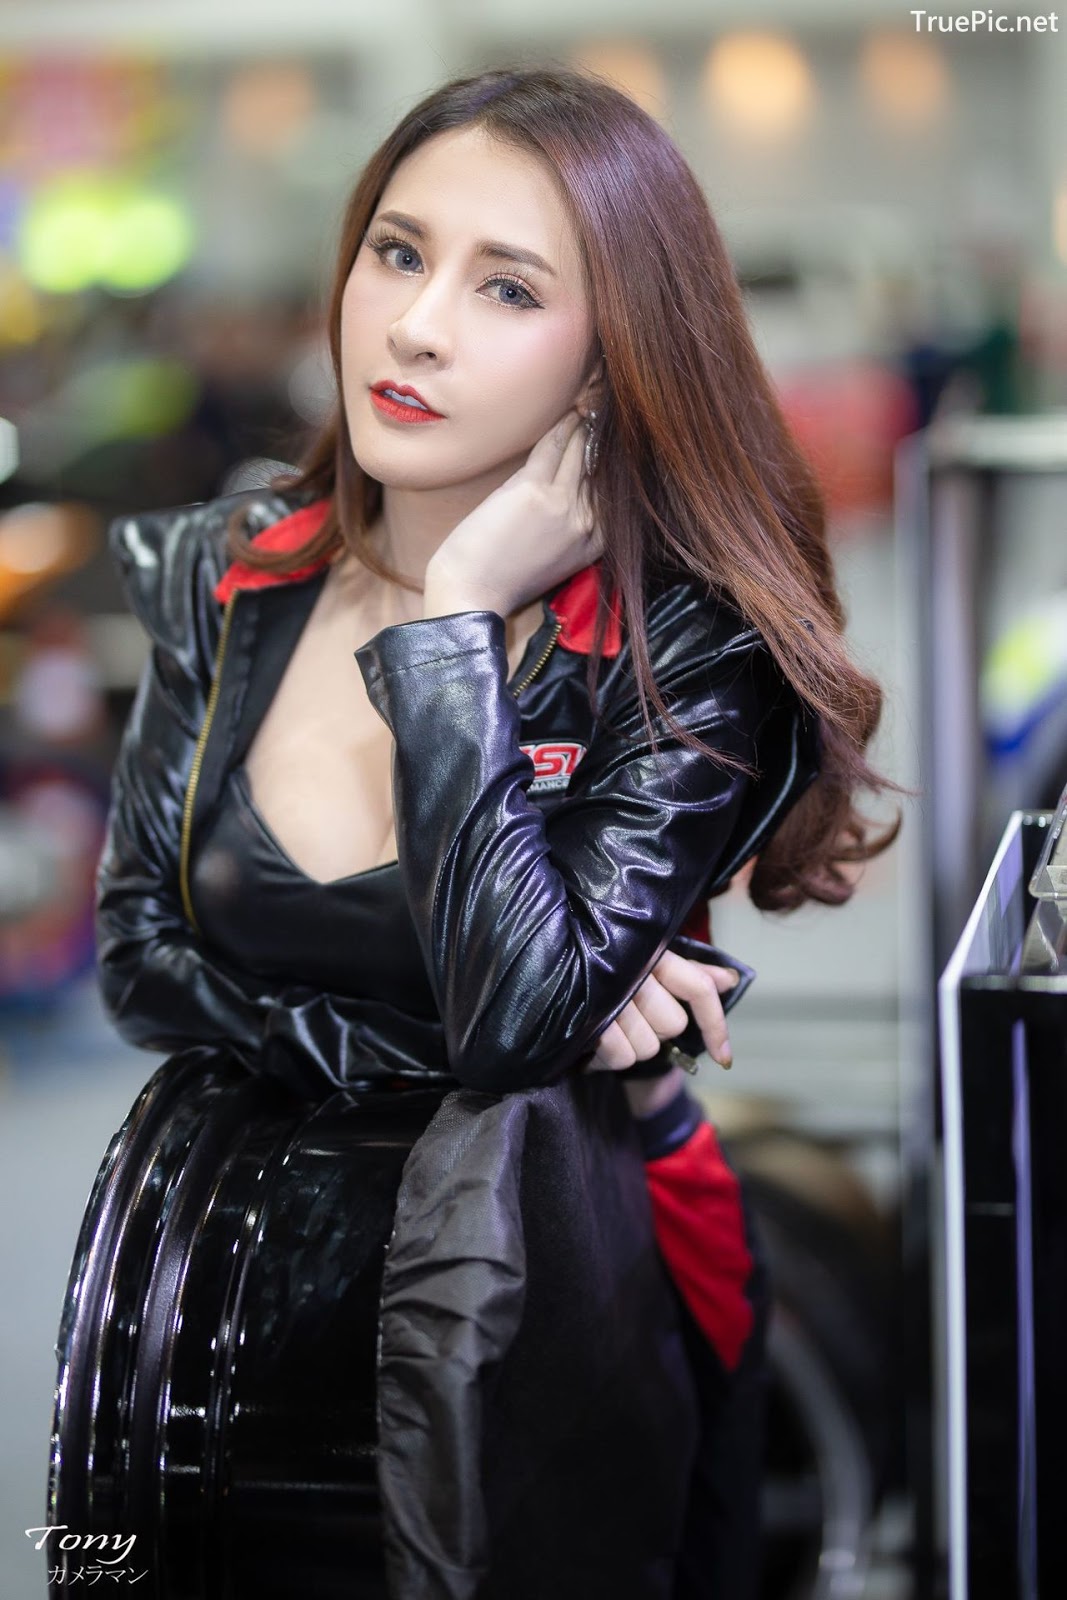 Image-Thailand-Hot-Model-Thai-Racing-Girl-At-Motor-Expo-2018-TruePic.net- Picture-67